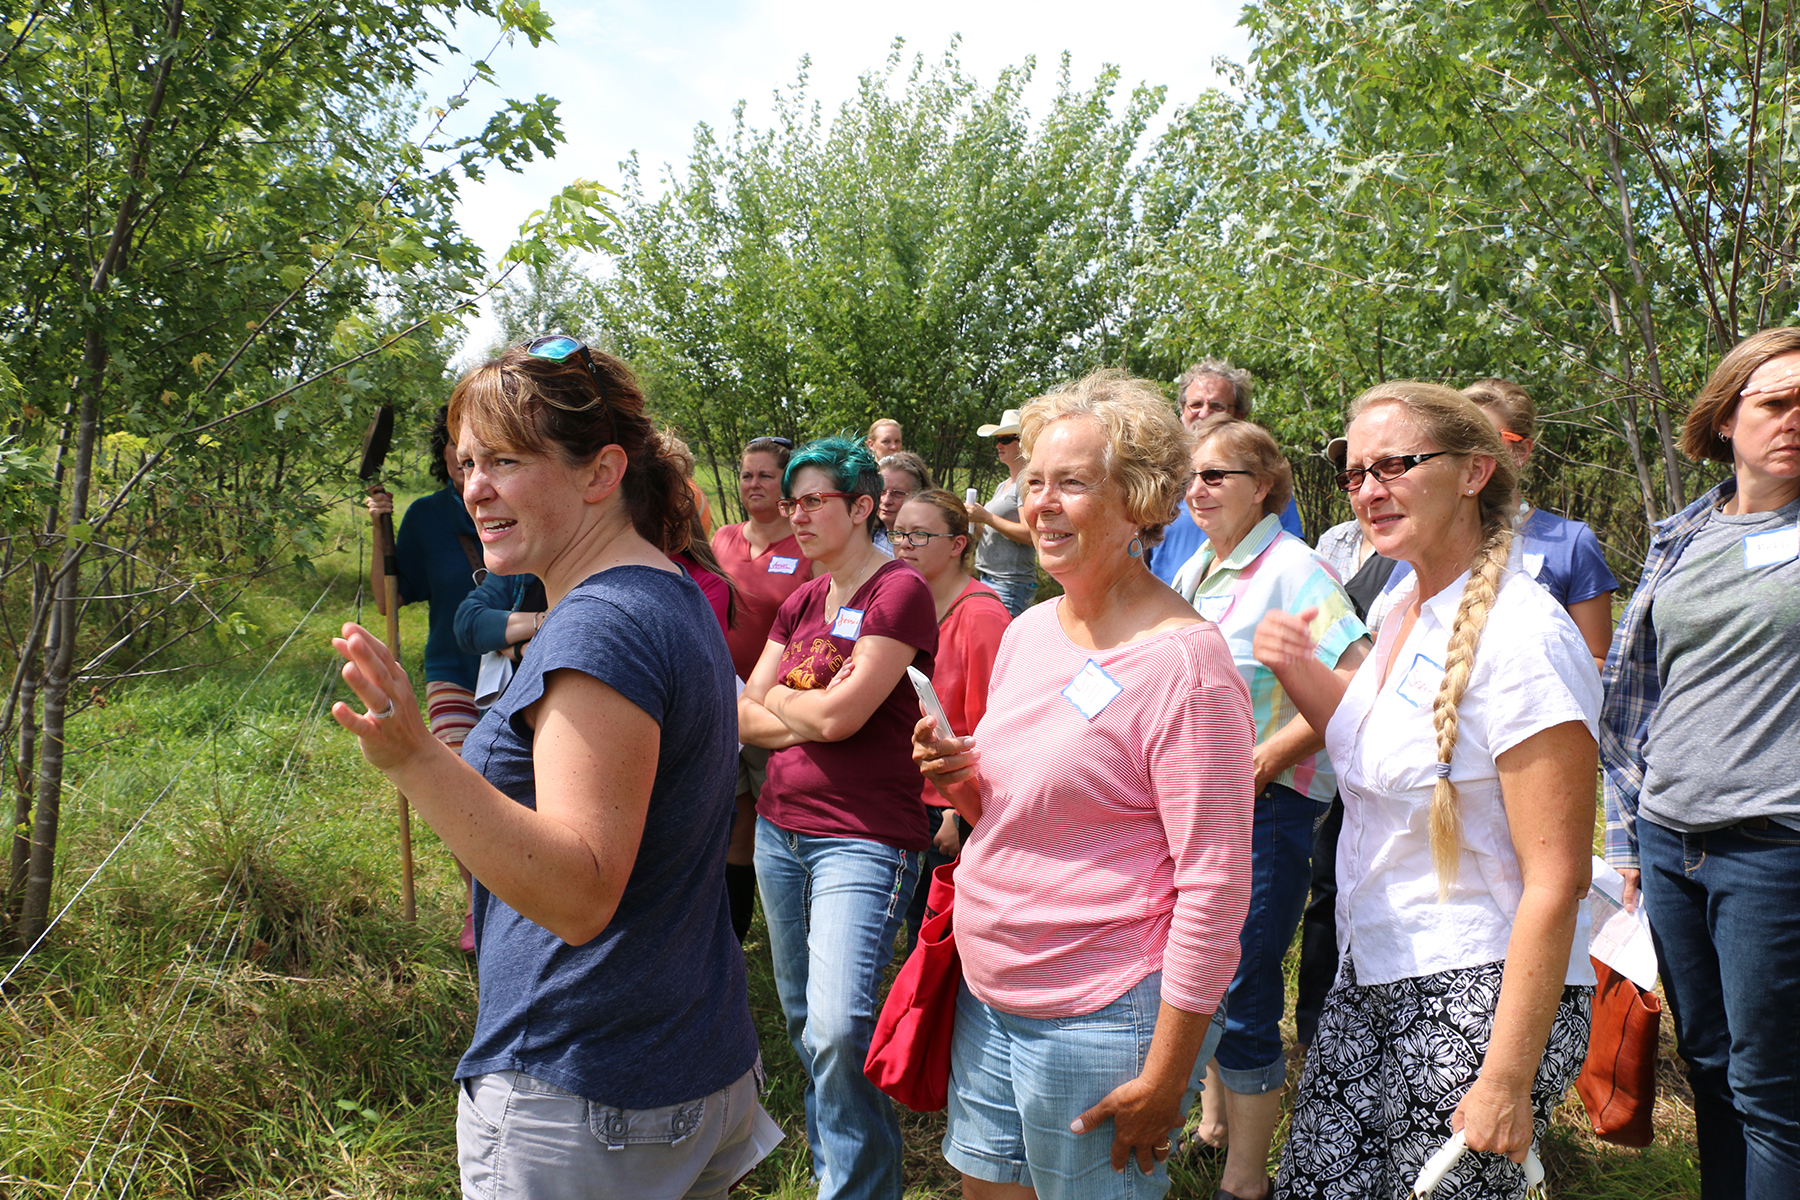 Wisconsin Women in Conservation's “Women Caring For The Land” pre-COVID field day with Wisconsin Farmers Union.